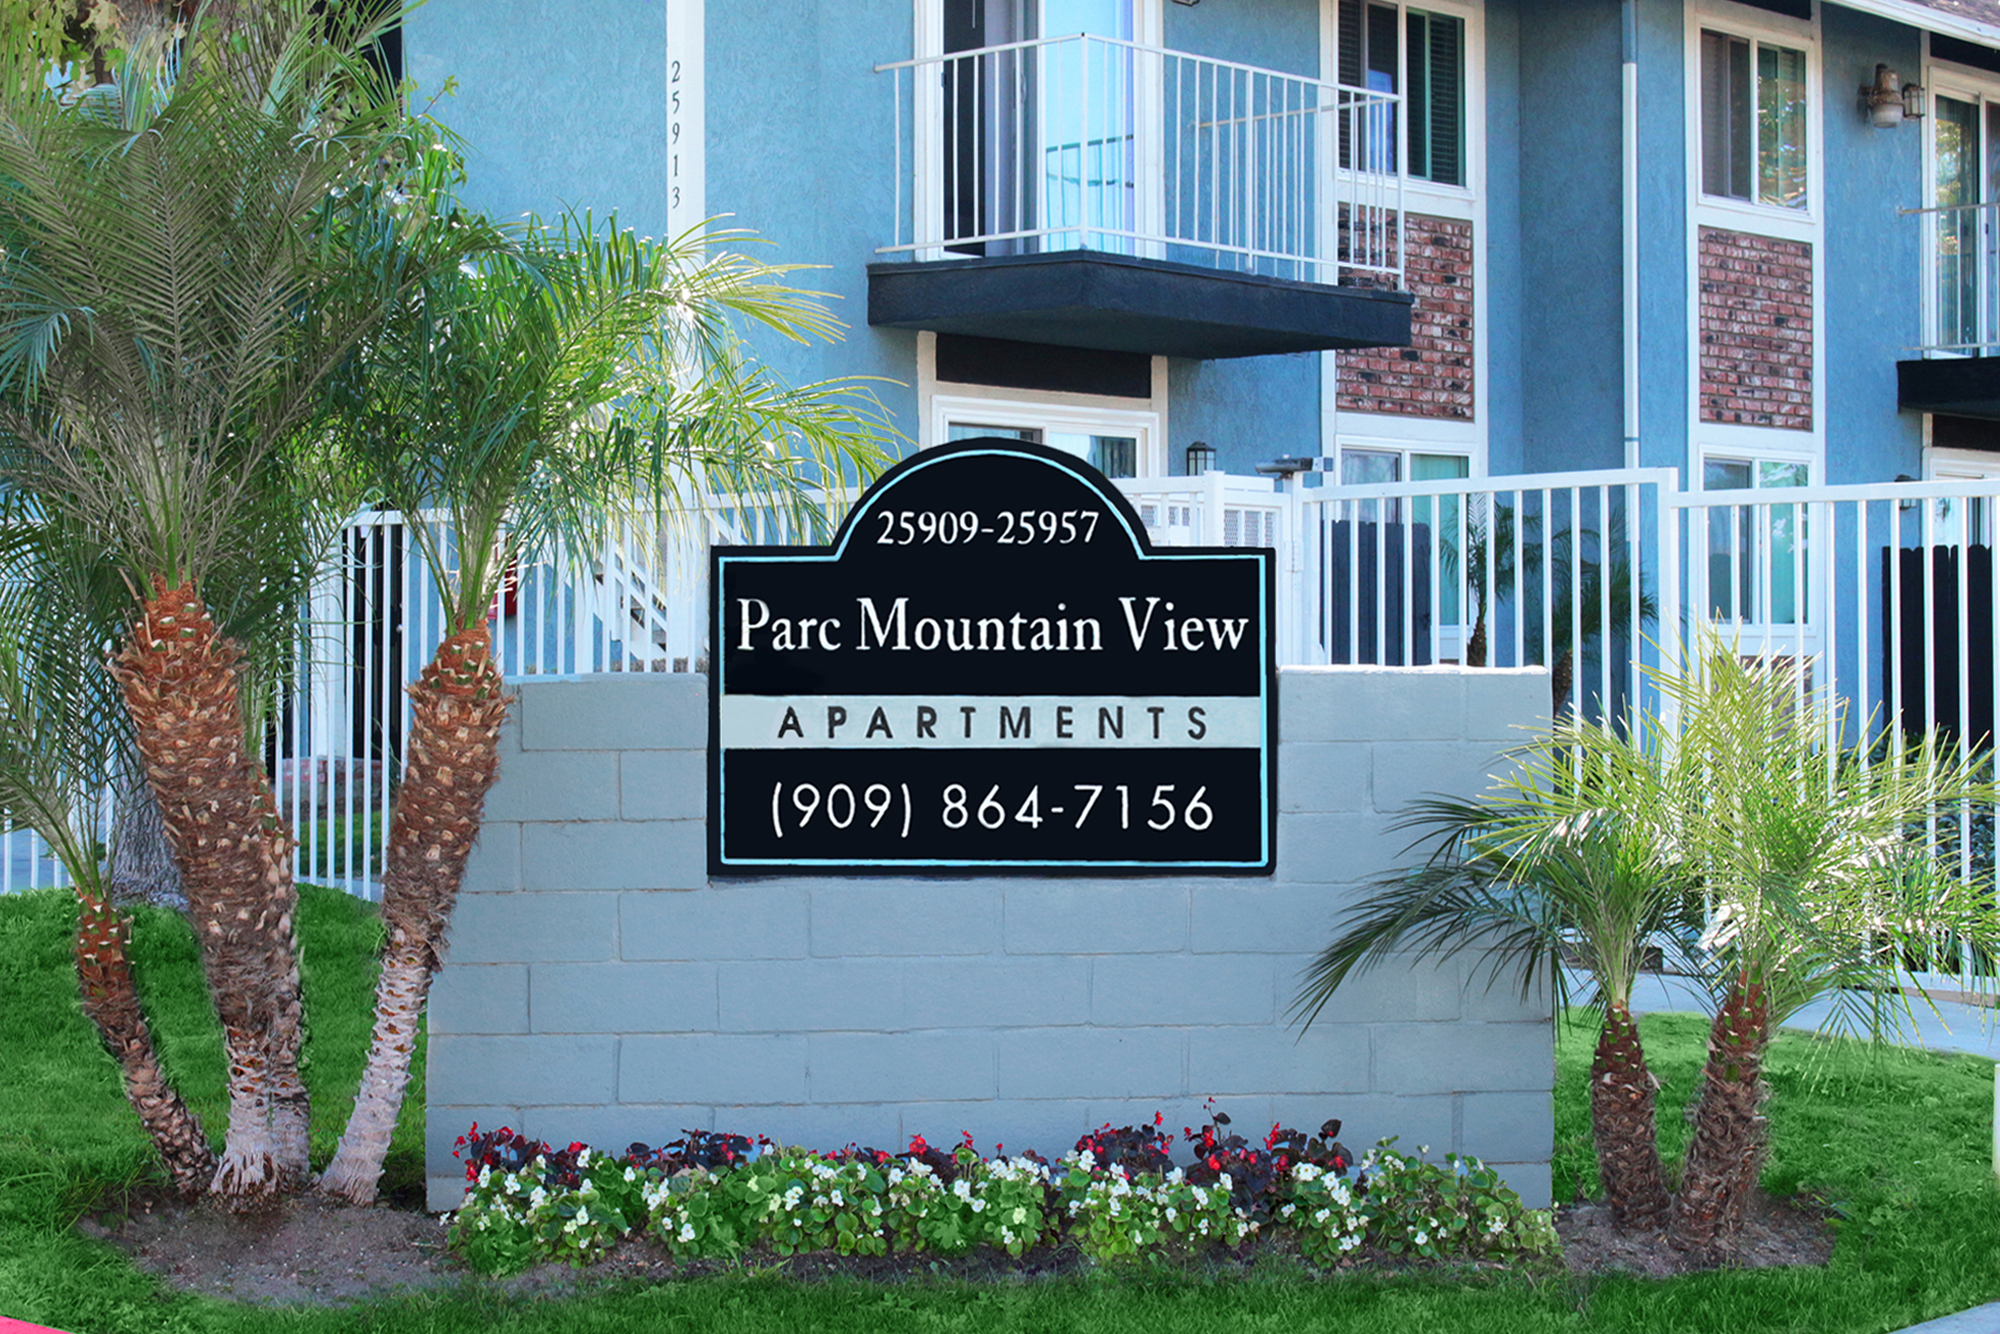 This image shows the entrance of one of Parc Mountain View Apartments units